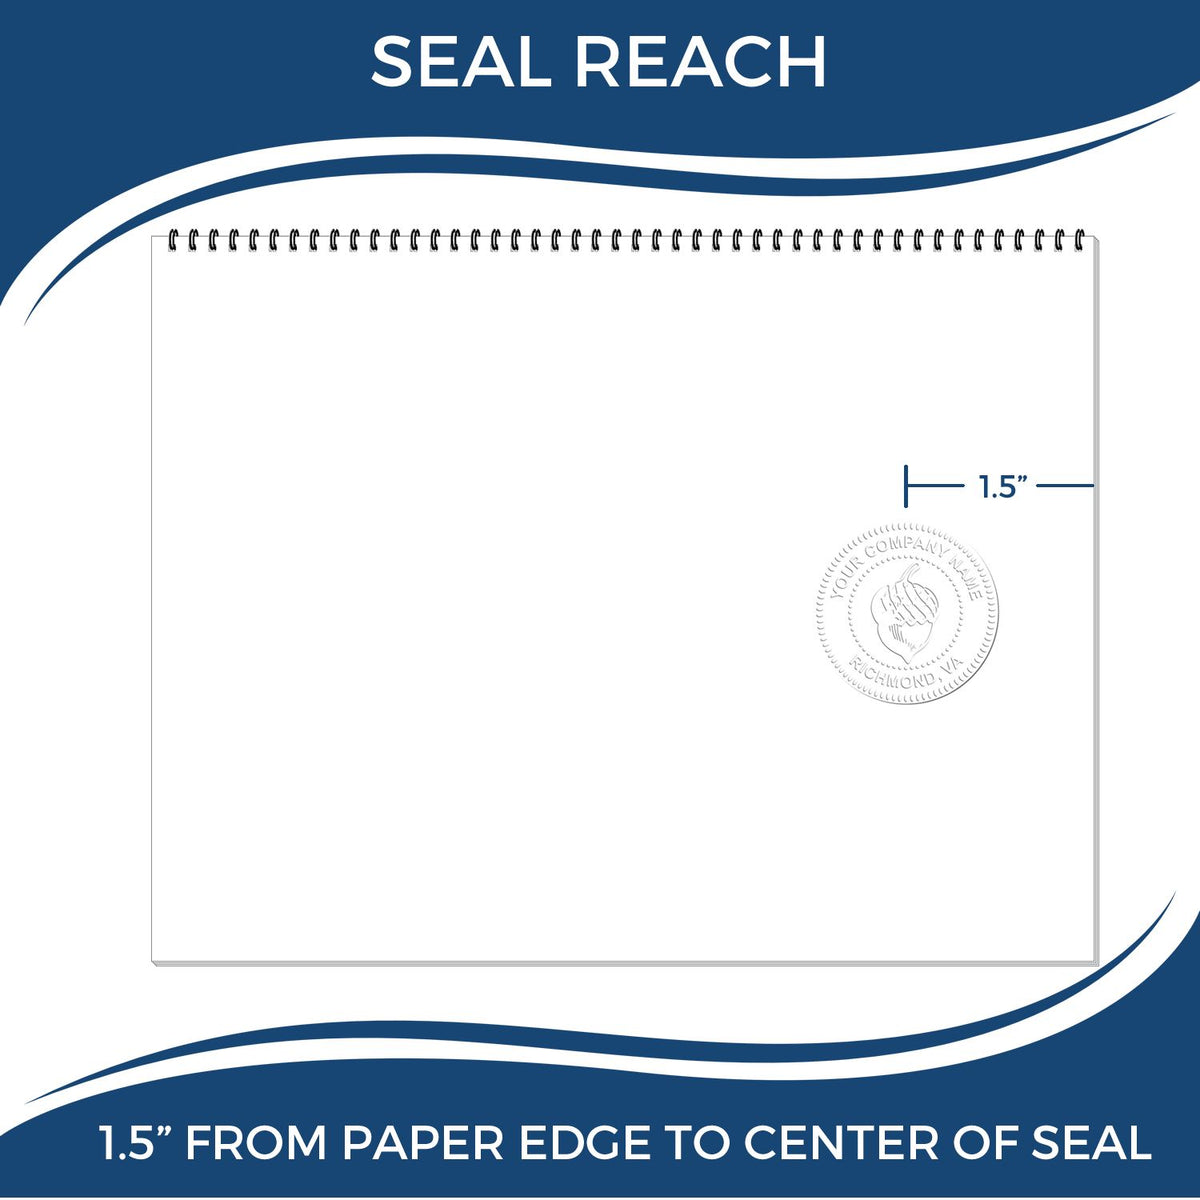 An infographic showing the seal reach which is represented by a ruler and a miniature seal image of the Soft Wyoming Professional Geologist Seal